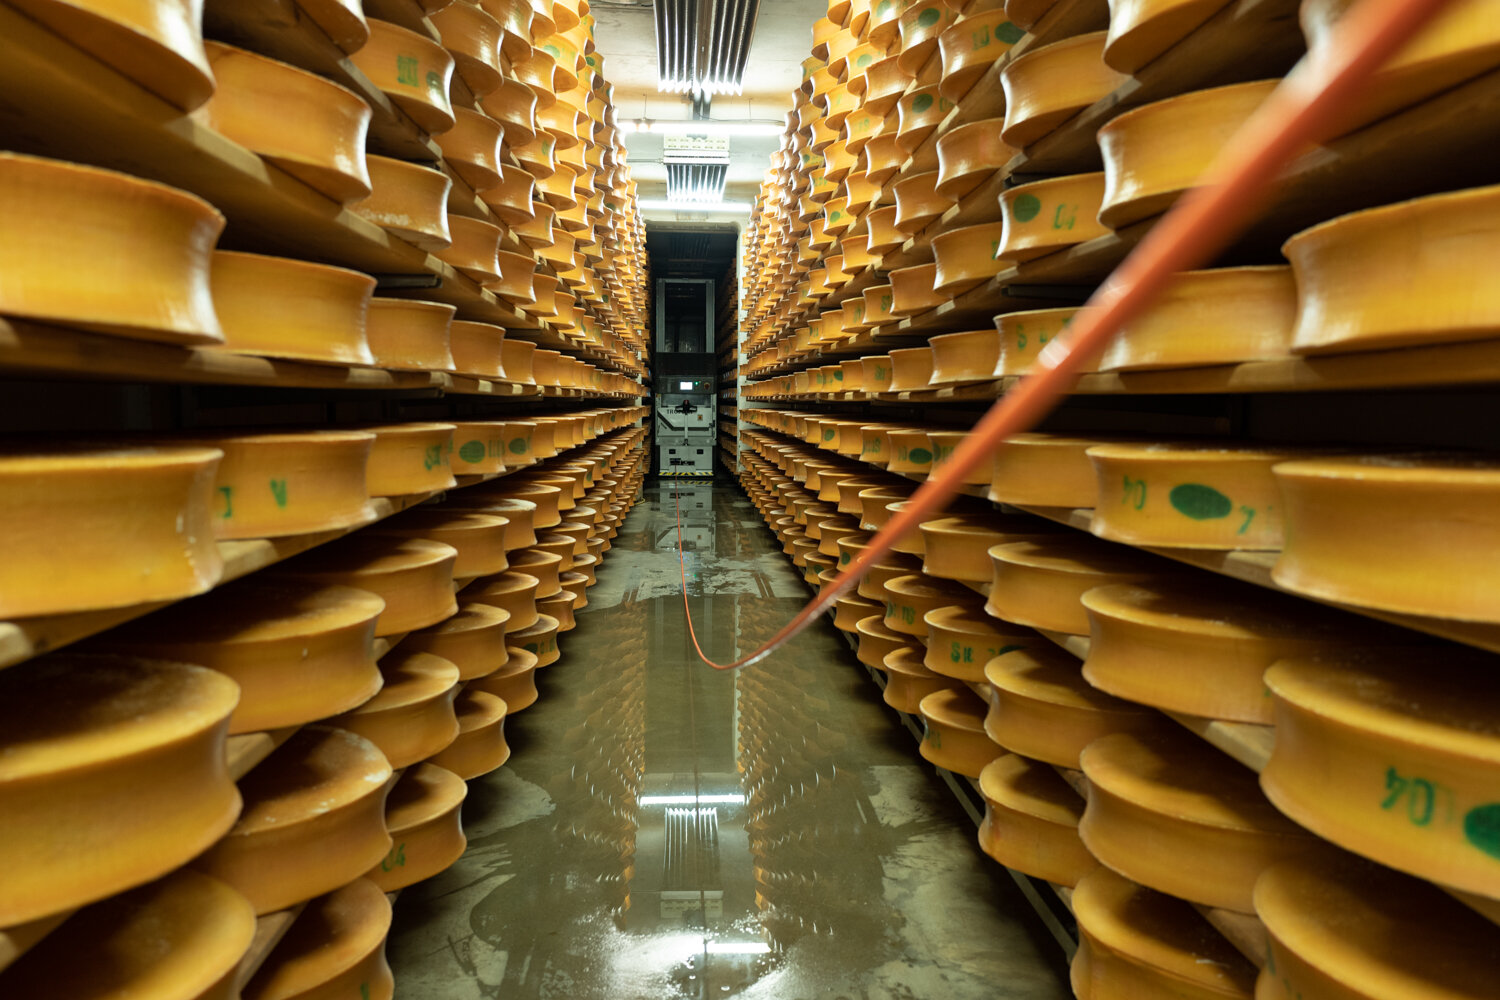  The vault: the more mature, the more golden and valuable the cheeses become, making the cellar look like a round ingots vault. 